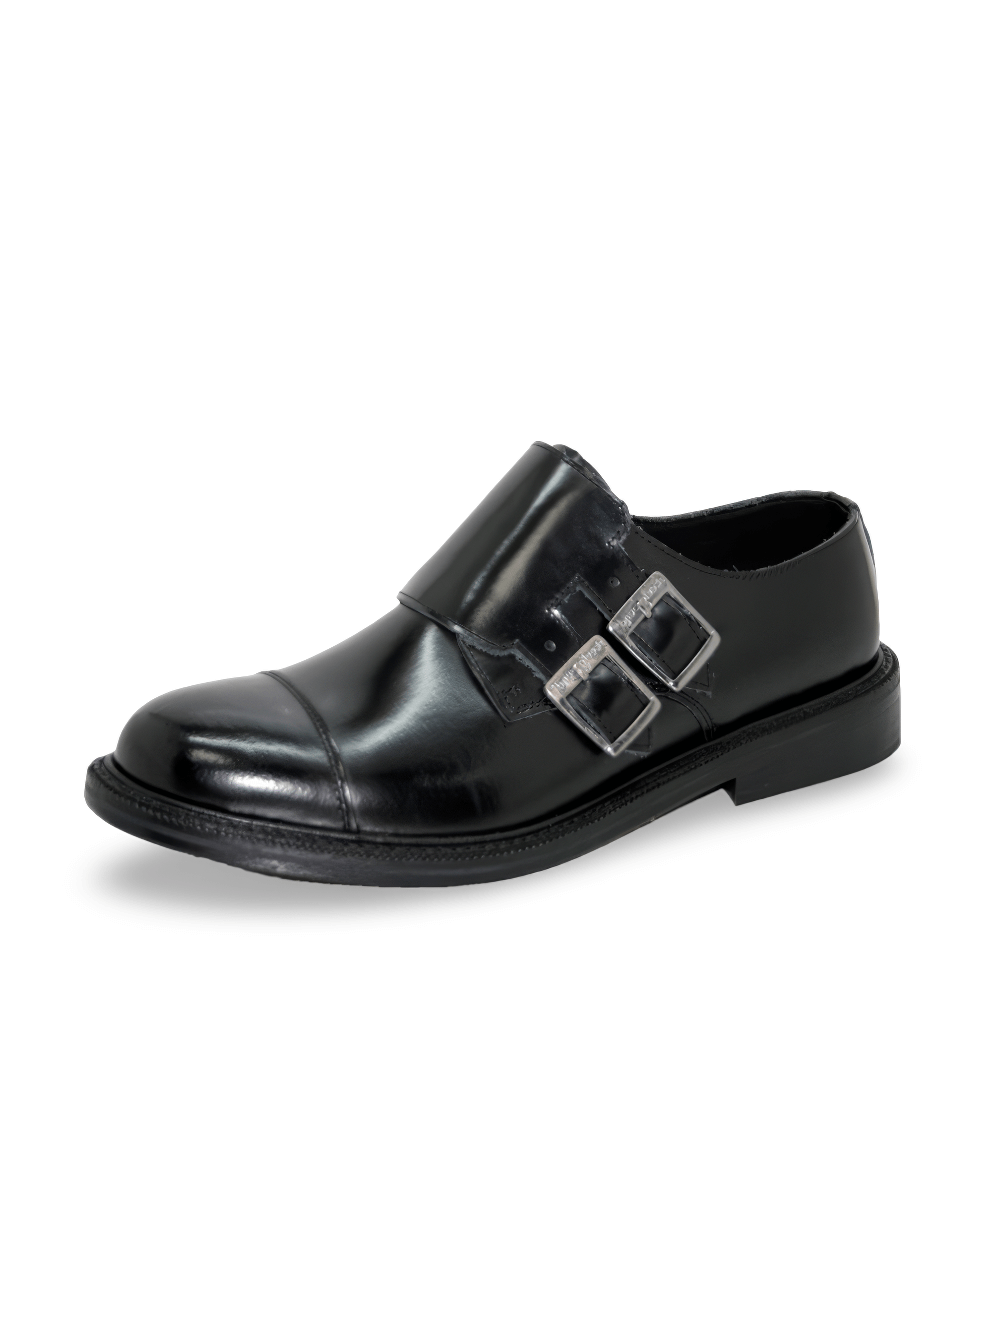 Men's Black Leather Monk Shoes with Buckle Closure